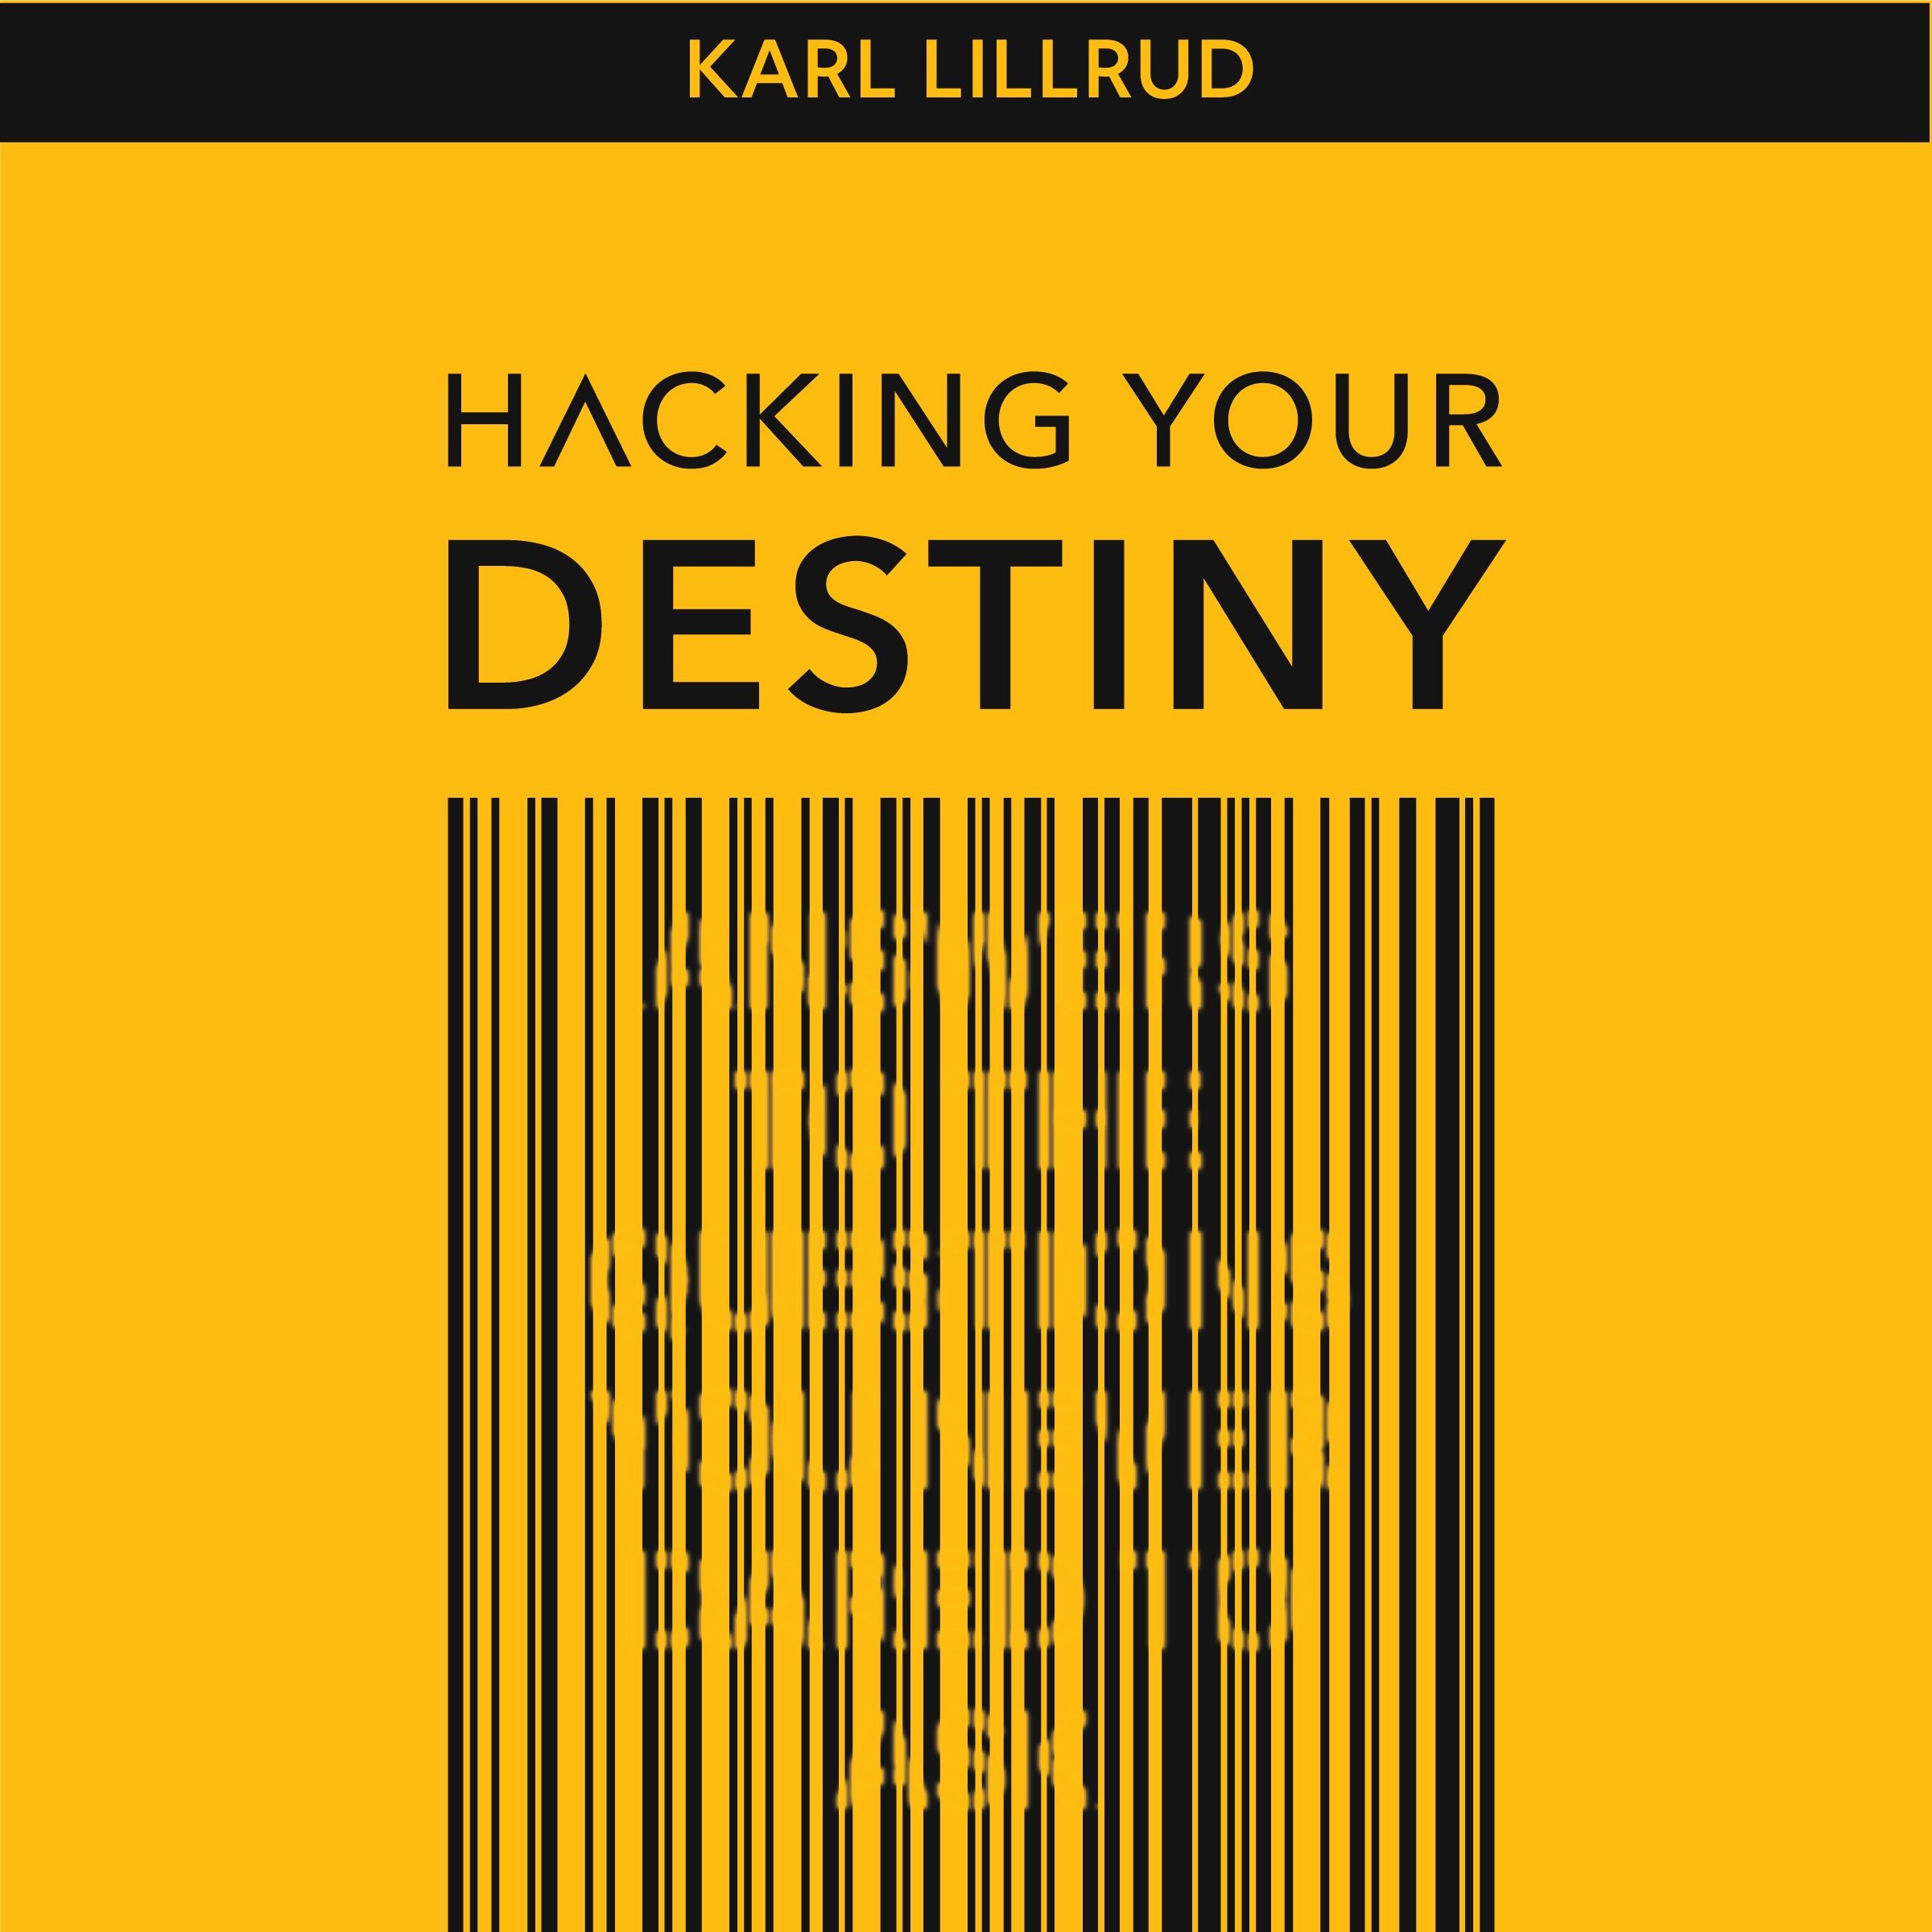 Hacking your destiny, eBook by Karl Lillrud